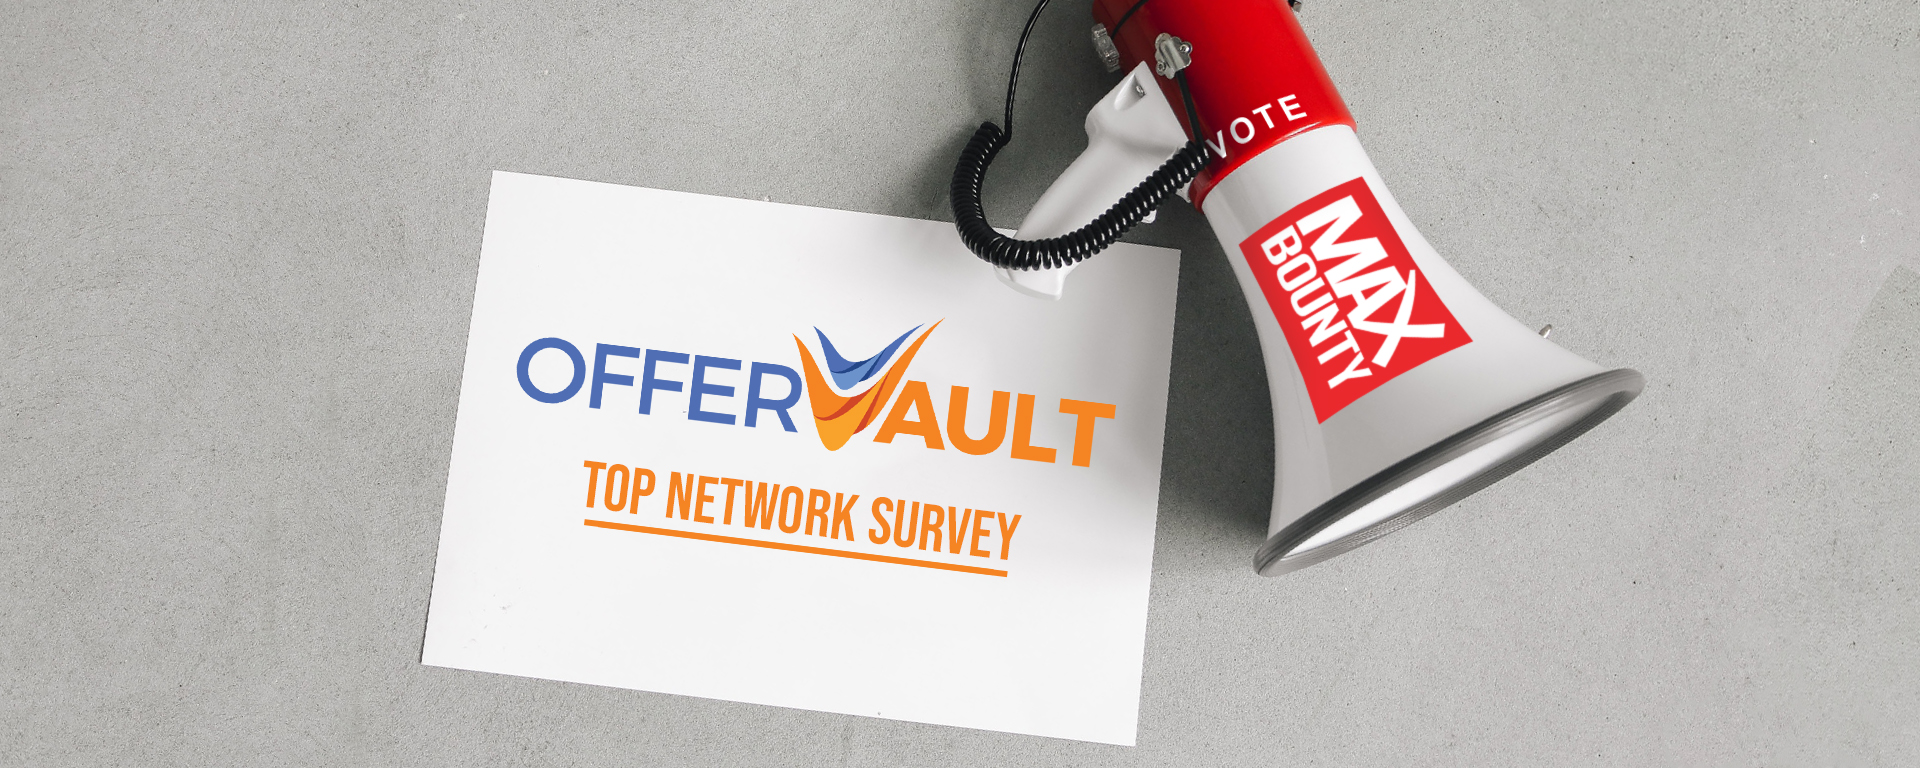 Use Your Voice to Vote MaxBounty as OfferVault’s #1 Network